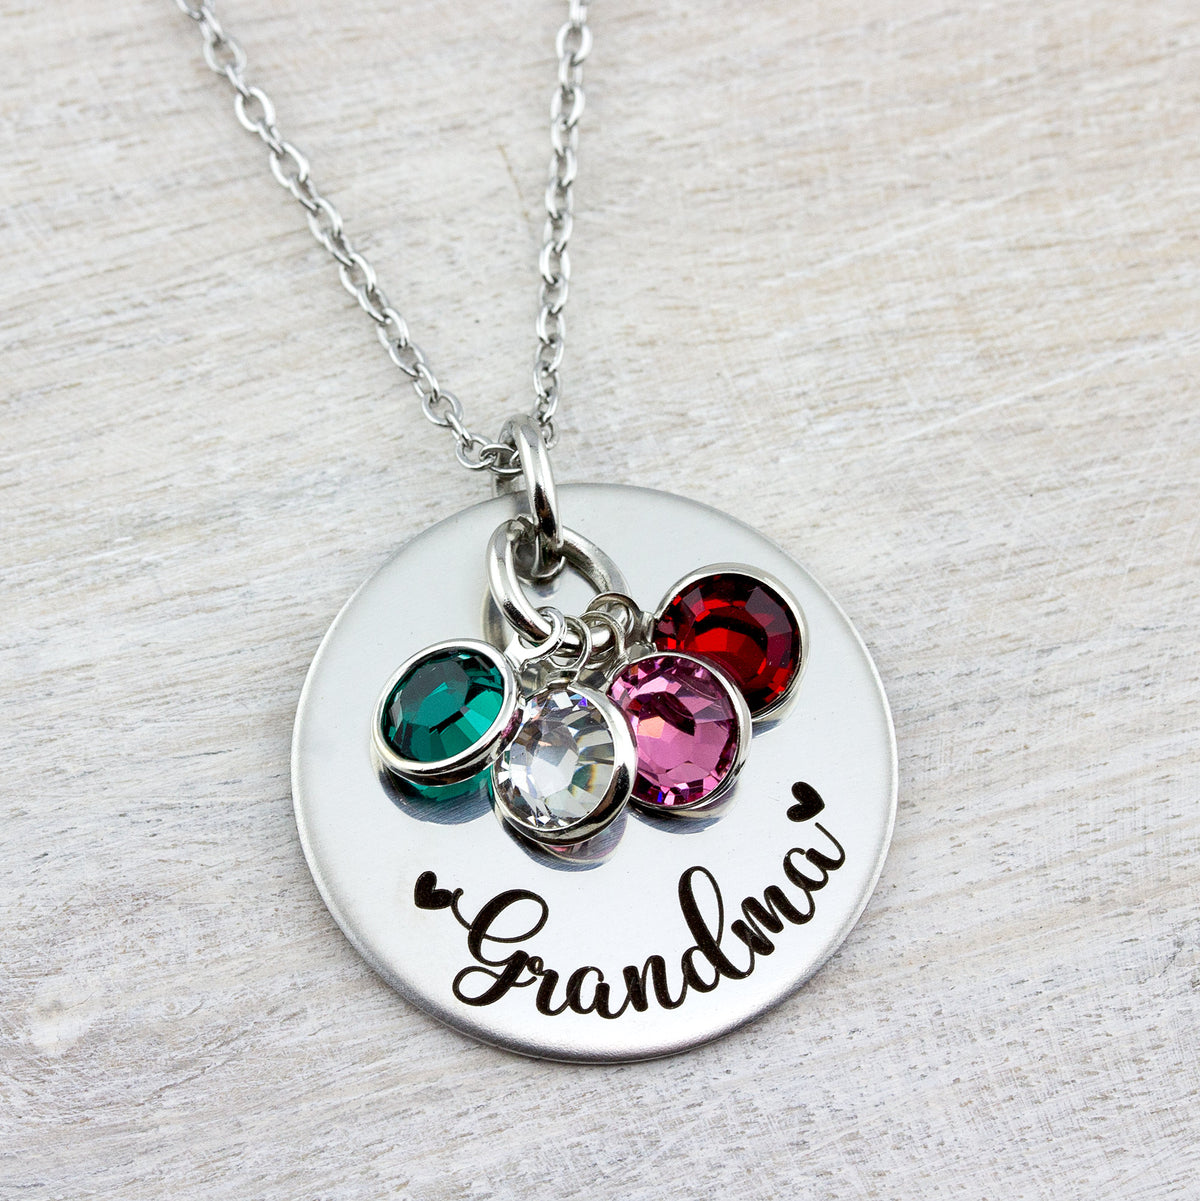 Grandmother Necklace, Birthstone Necklace for Grandma, Personalized Gift, Grandma Birthstone Necklace, Grandma Gift, Mothers Day Gift